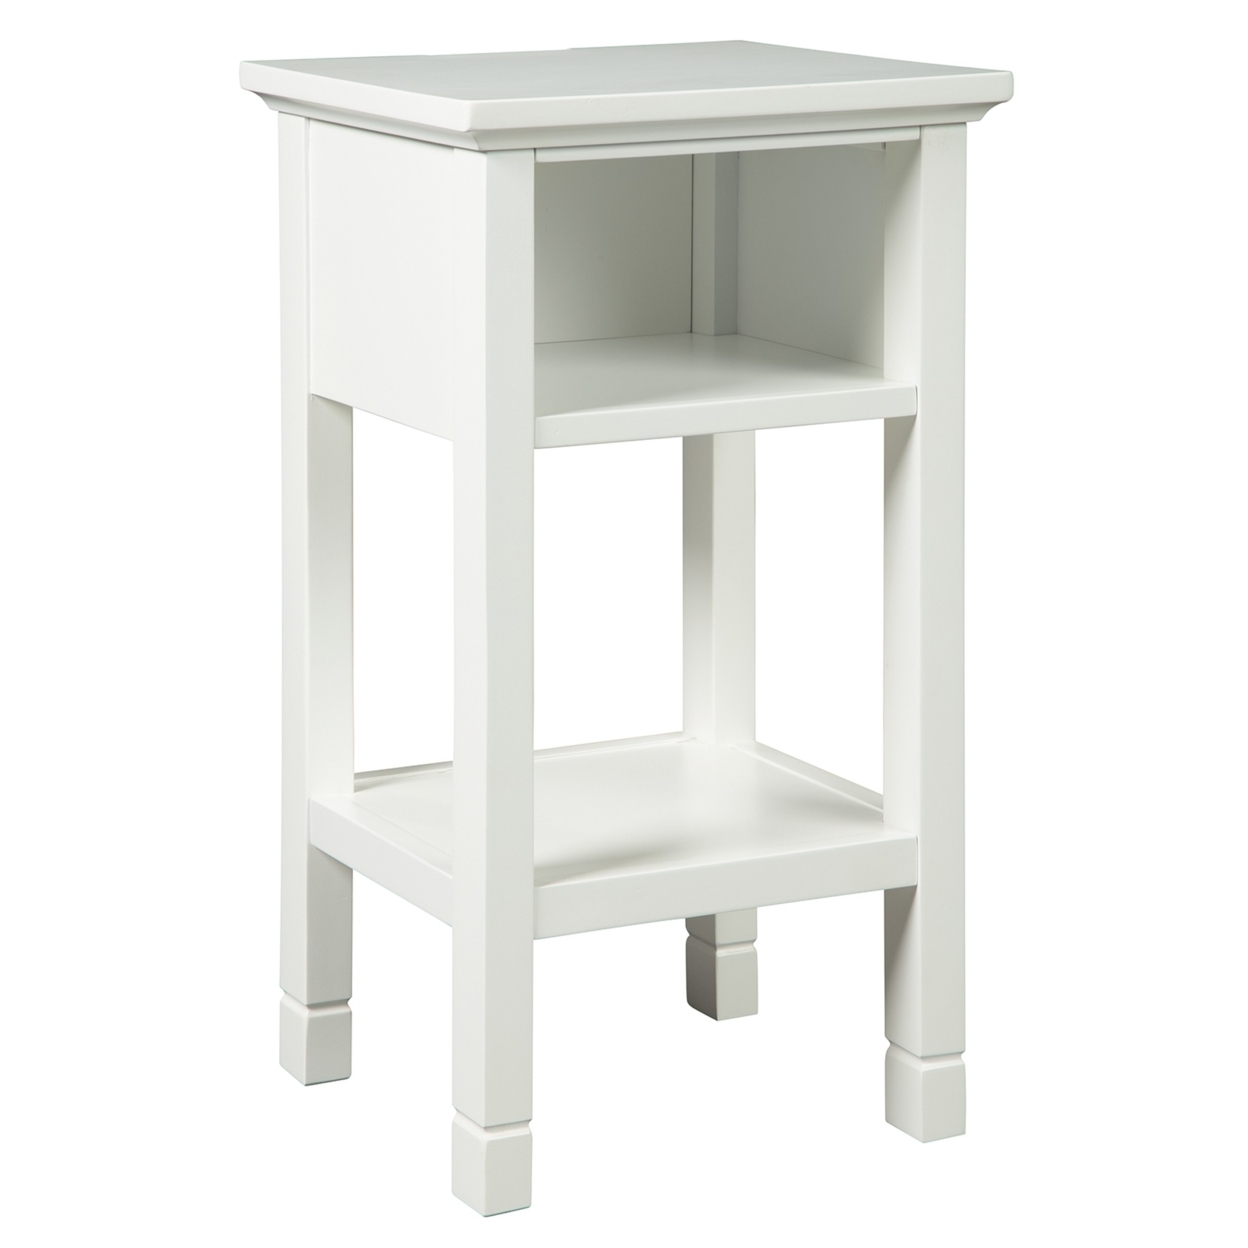 Square Wooden Accent Table With 2 USB Ports And Open Shelf, White- Saltoro Sherpi